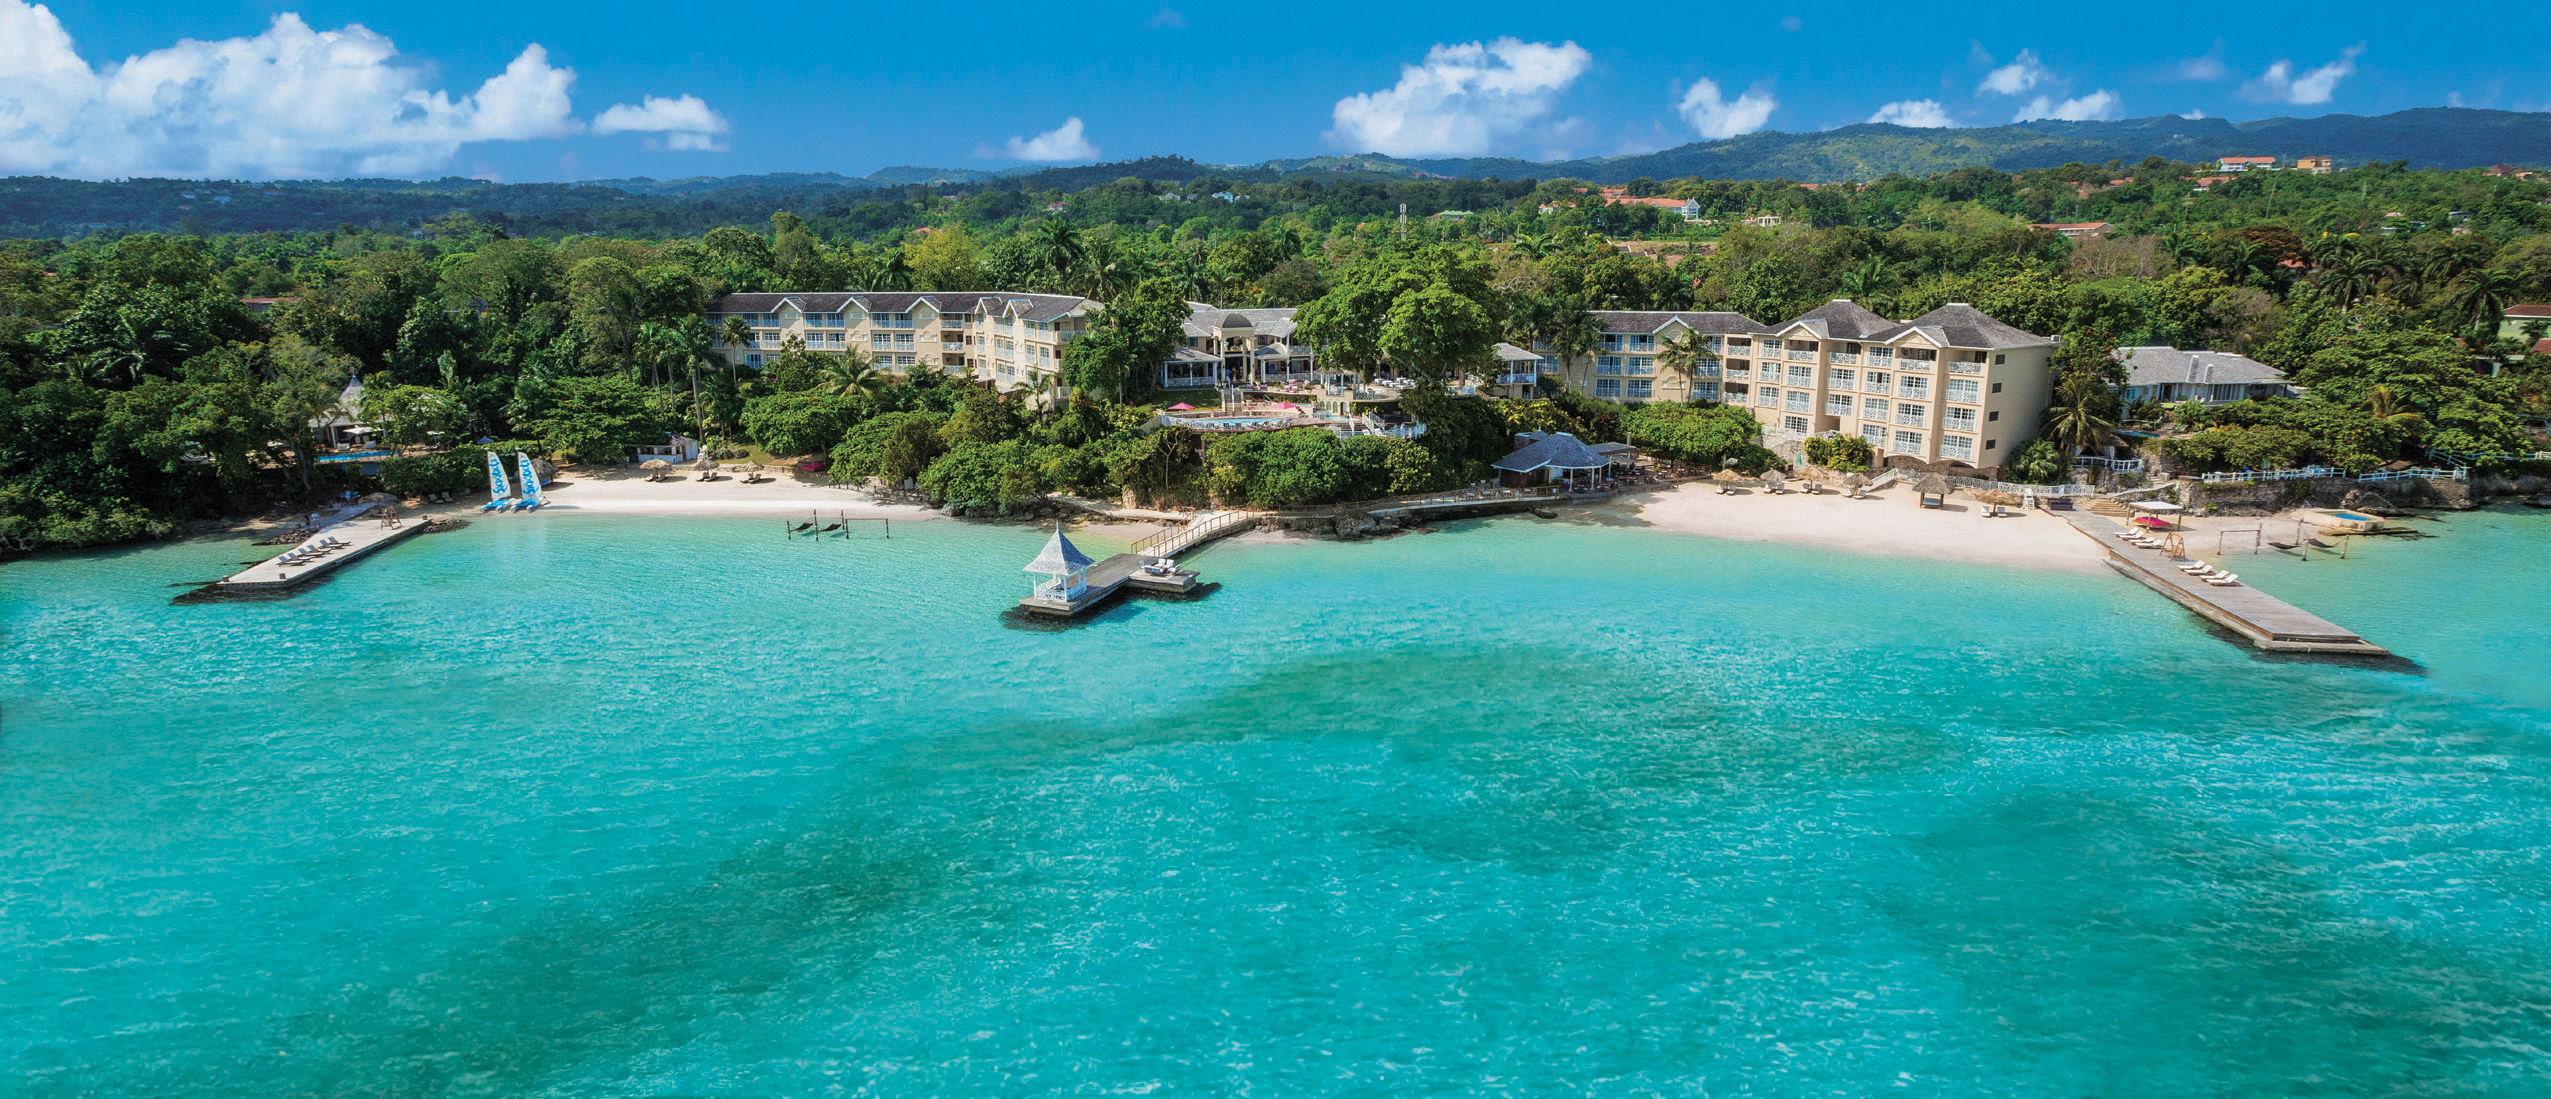 Top Hotels in Jamaica Reviews | Tropical Trips Jamaica